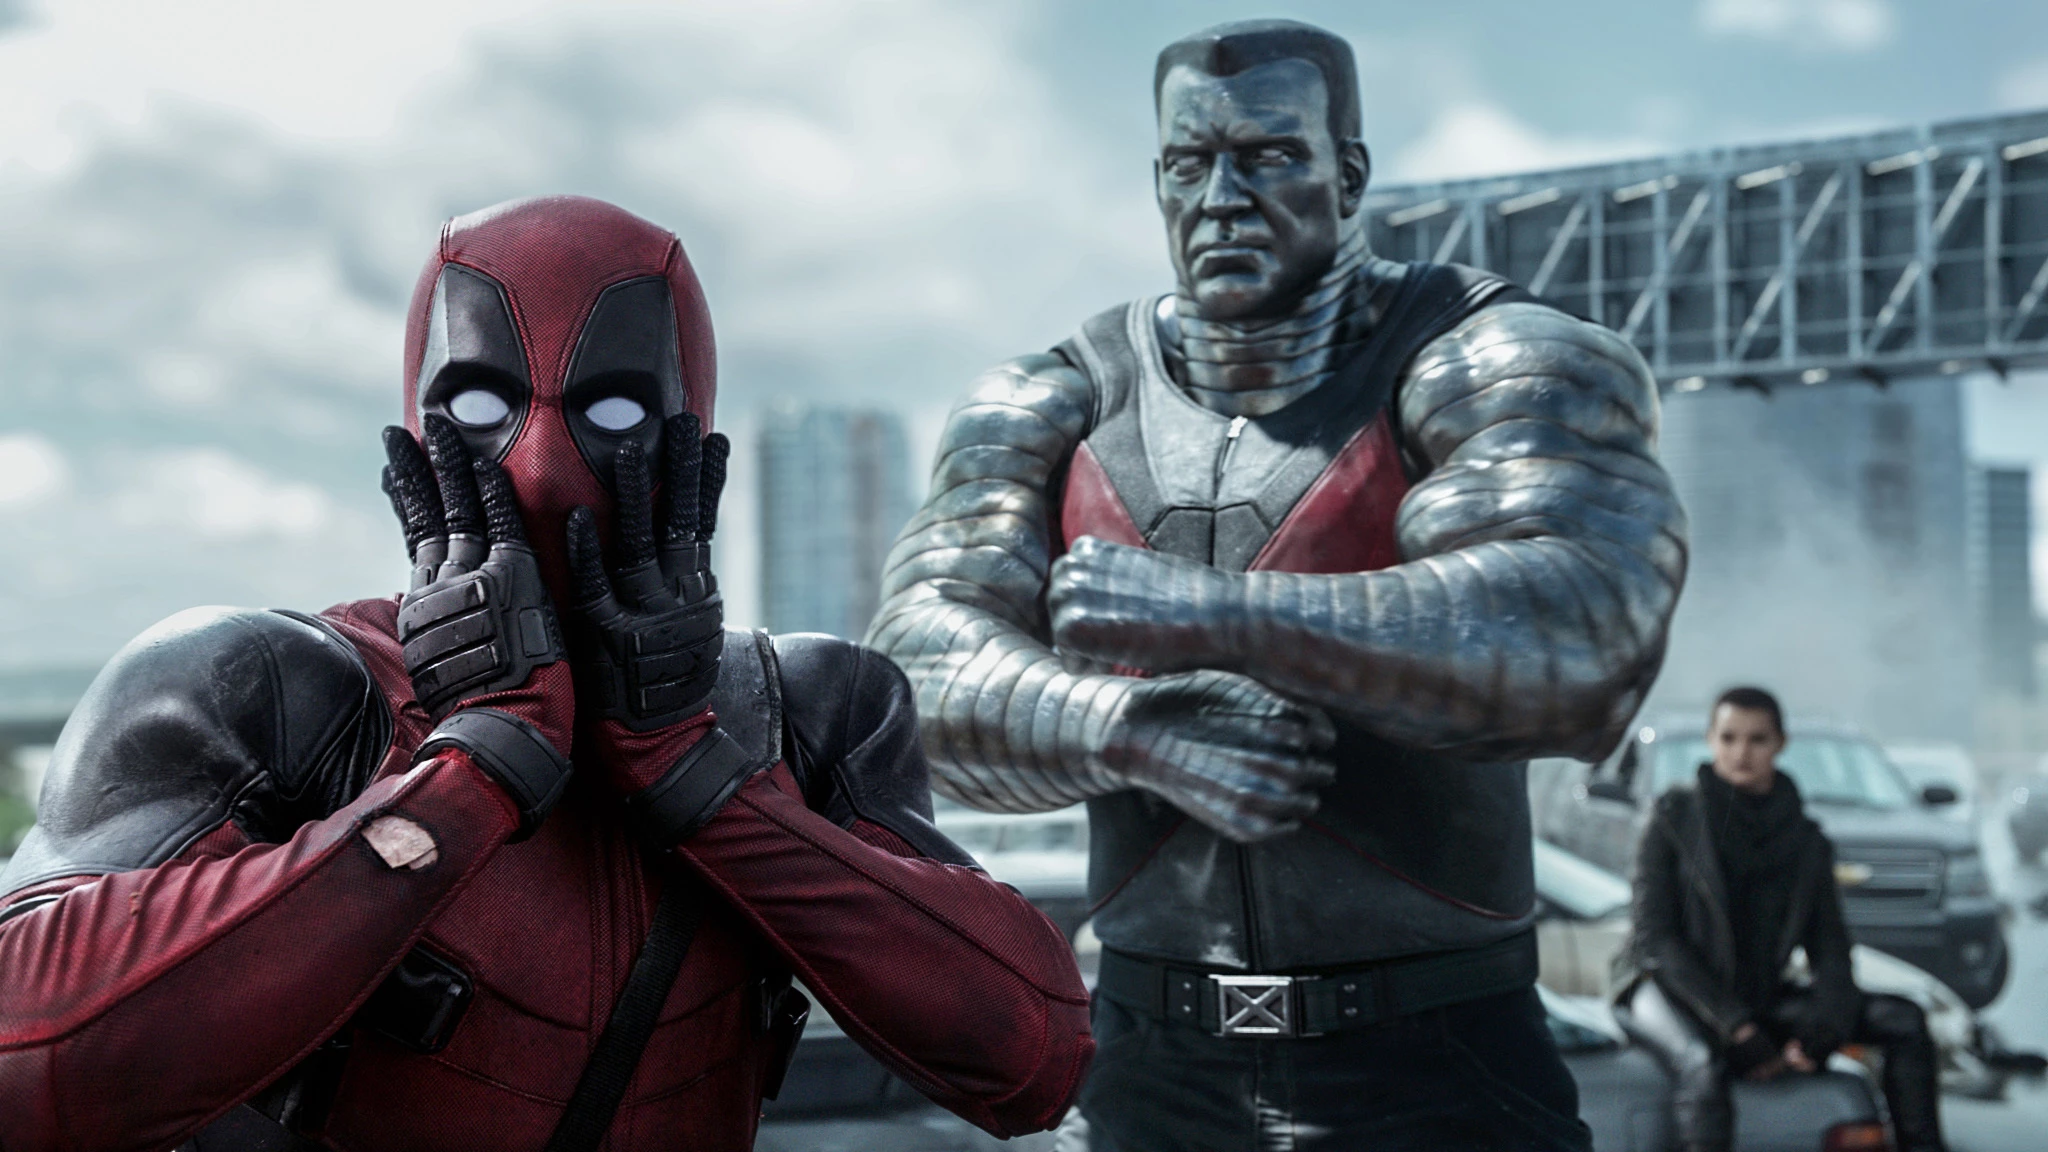 Deadpool Meets The Marvel Cinematic Universe: How Will It Play Out?